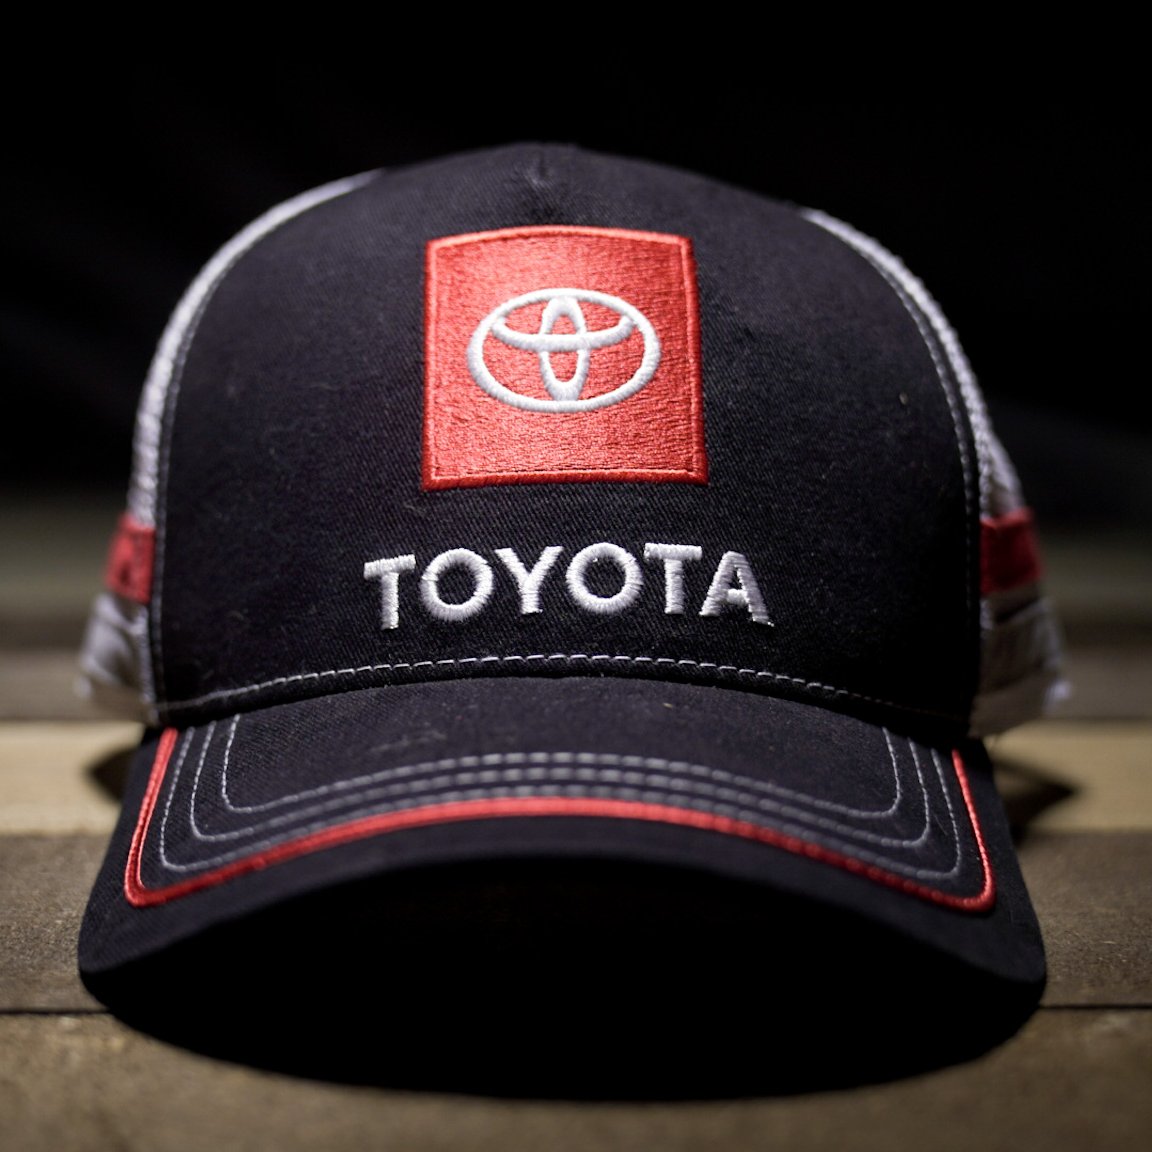 Toyota Racing on X: In honor of Denny Hamlin's win 🏁 at Talladega. RT TO  WIN this Toyota victory lane hat. We'll pick 11 random winners on Wednesday  at 7:00 PM ET